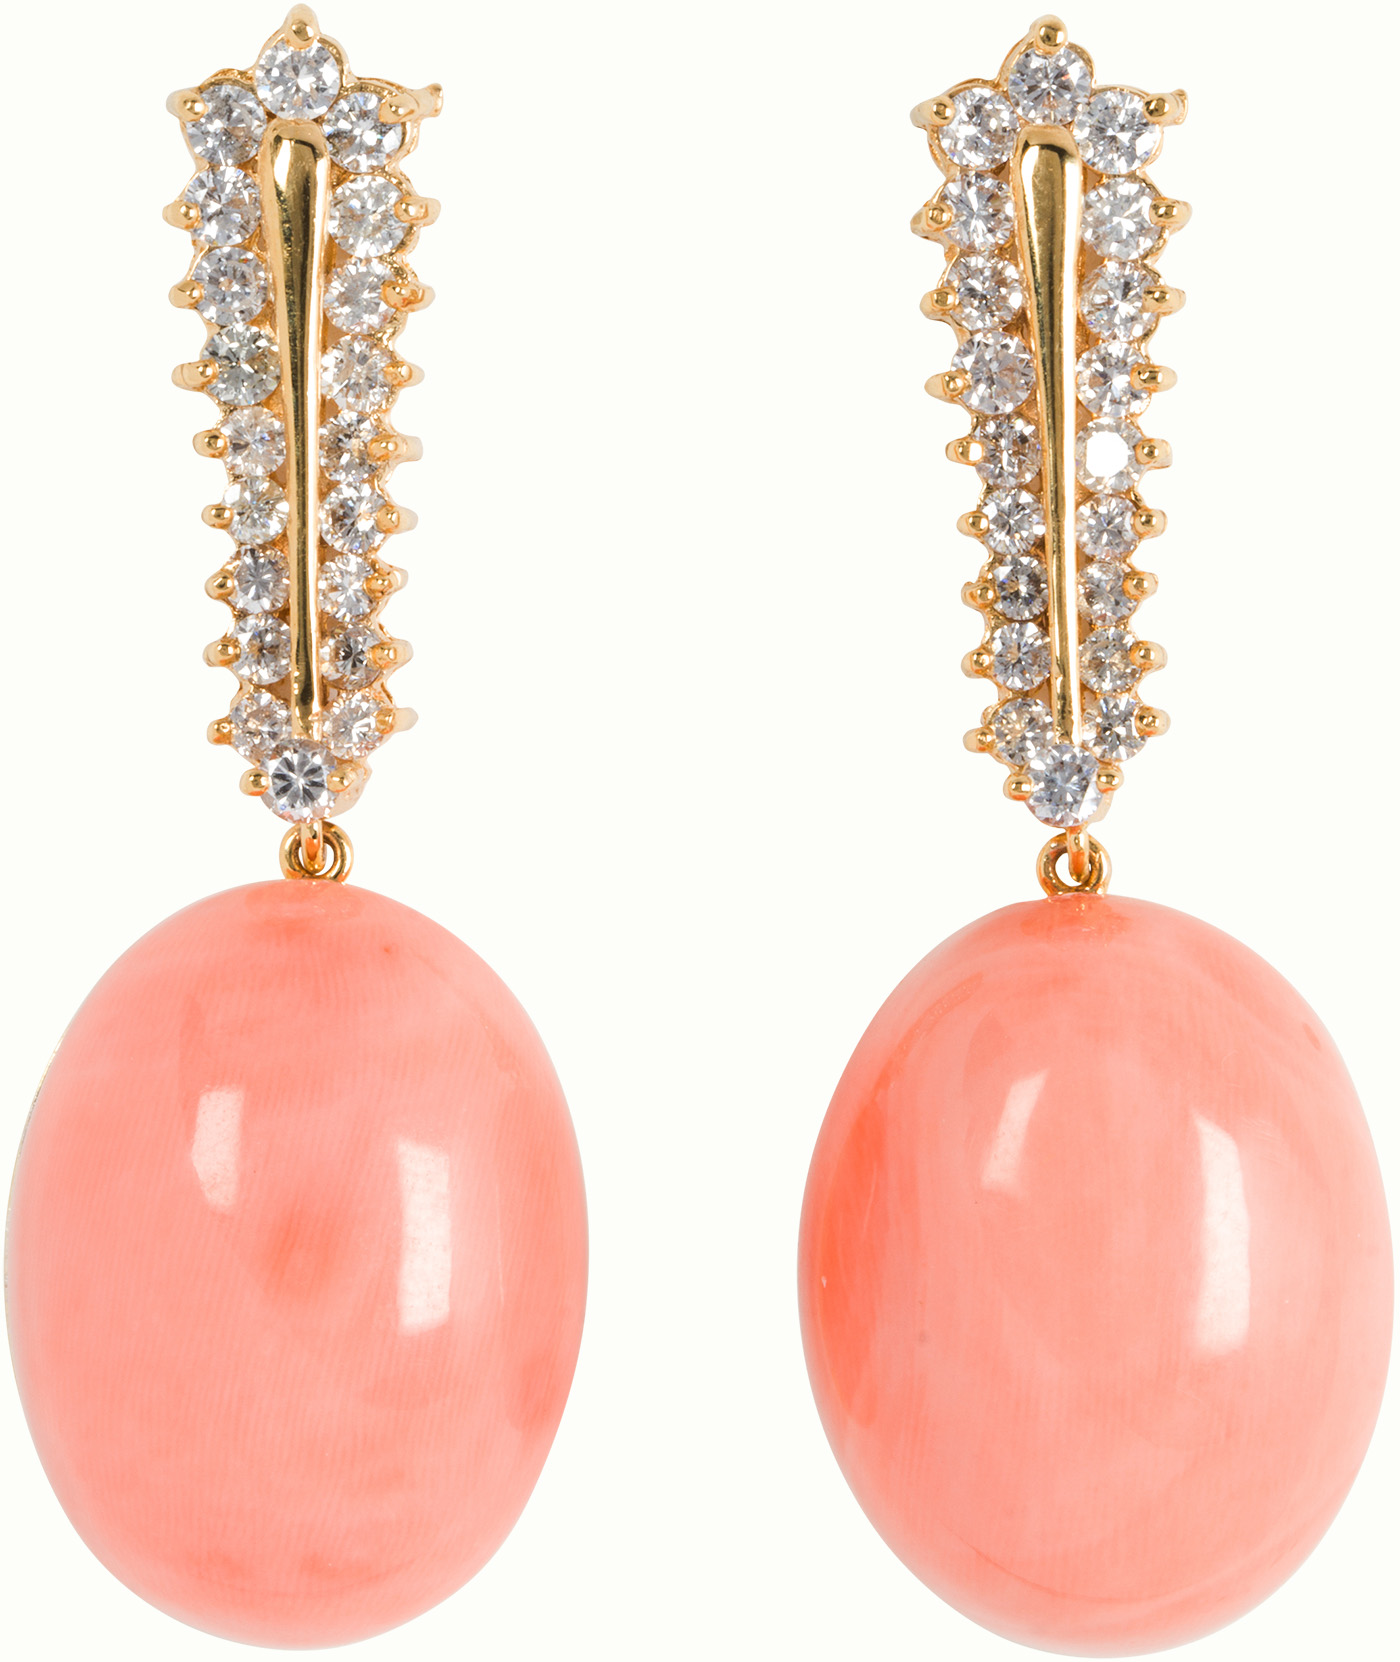 A pair of coral, diamond and fourteen karat gold earrings.